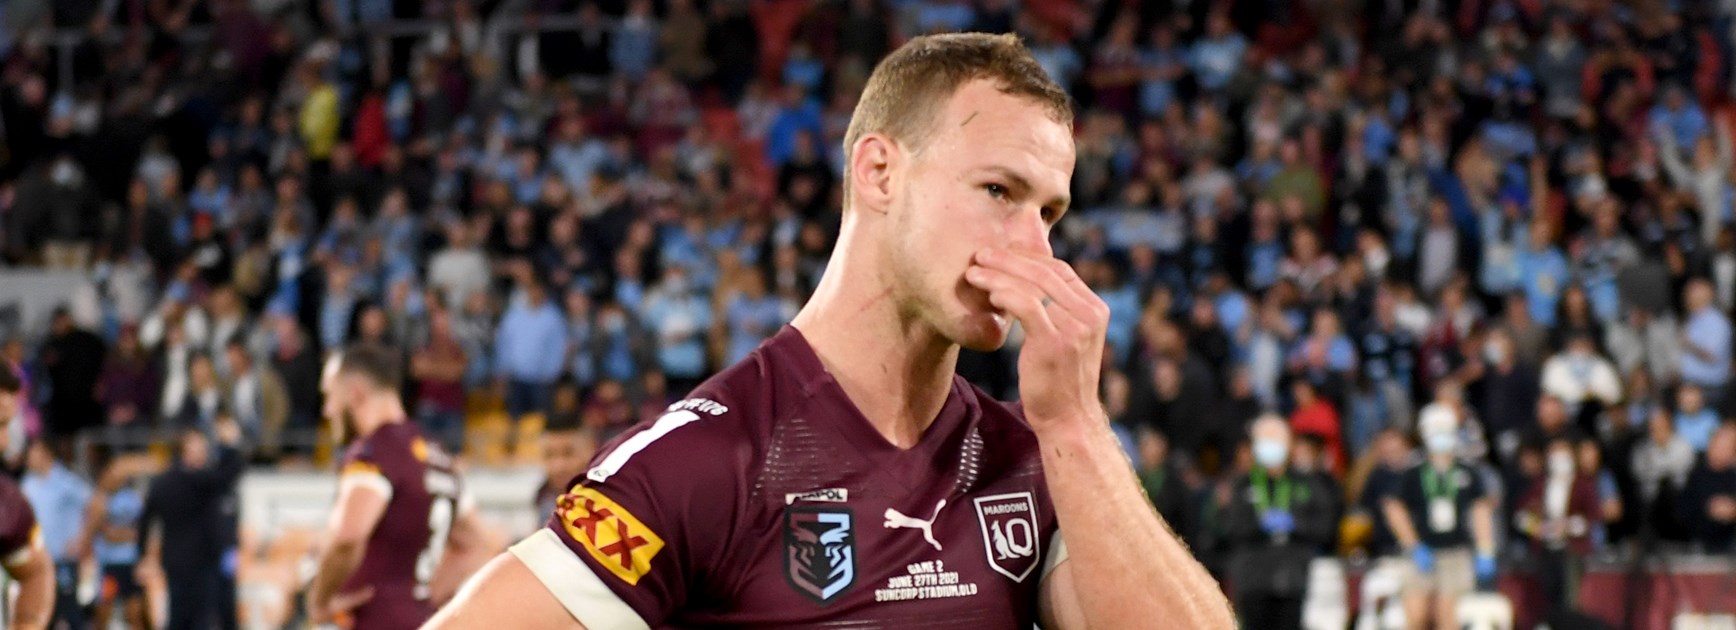 DCE will rebound from series loss: Croker